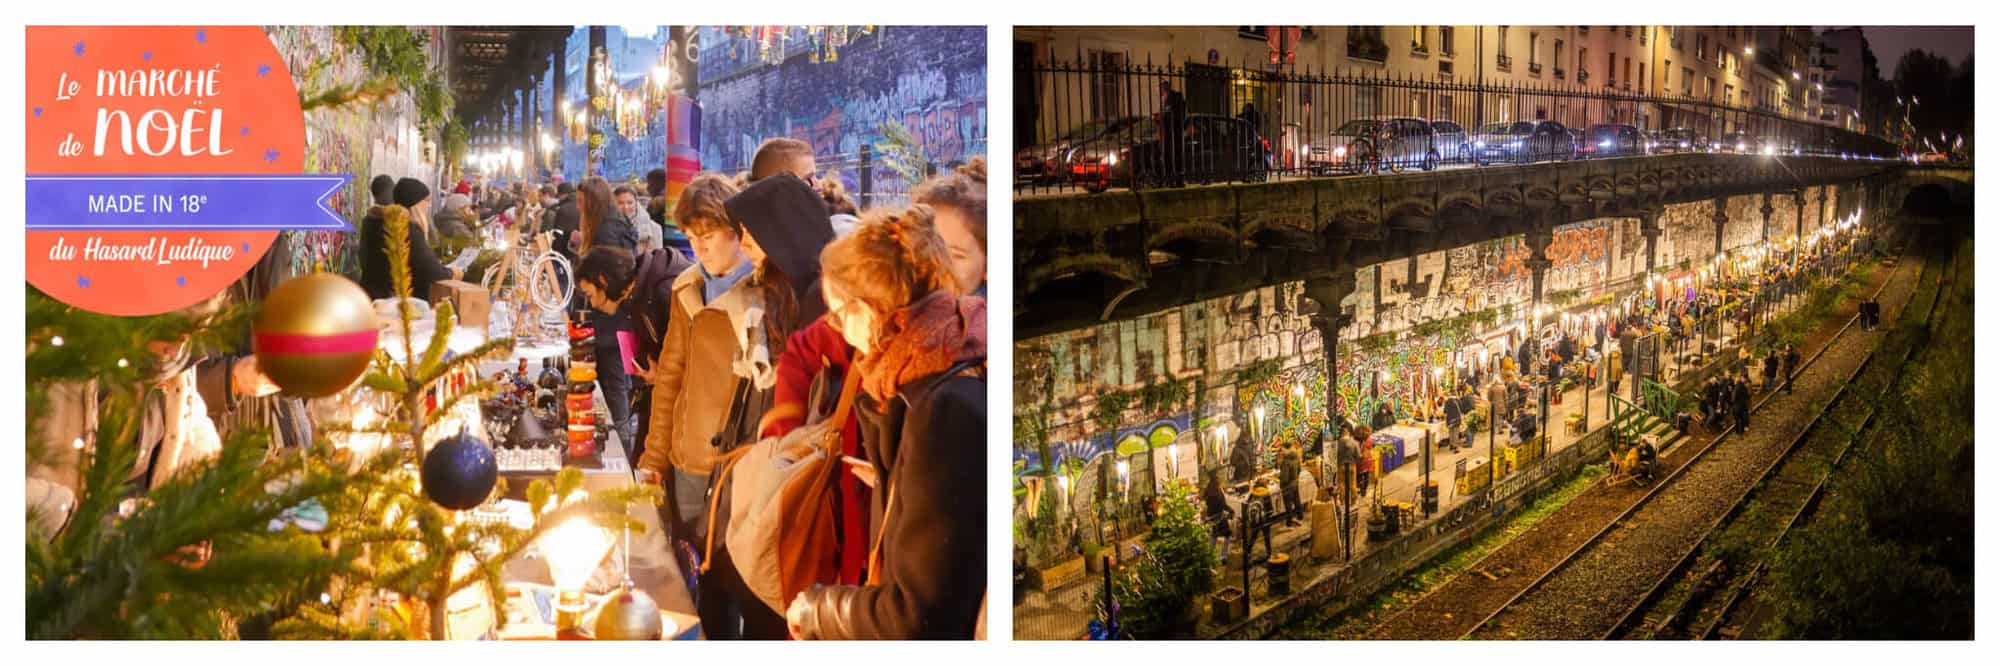 Left: promotional image for the Christmas market at Le Hasard Ludique. Right: a market at Le Hasard Ludique at night time. 